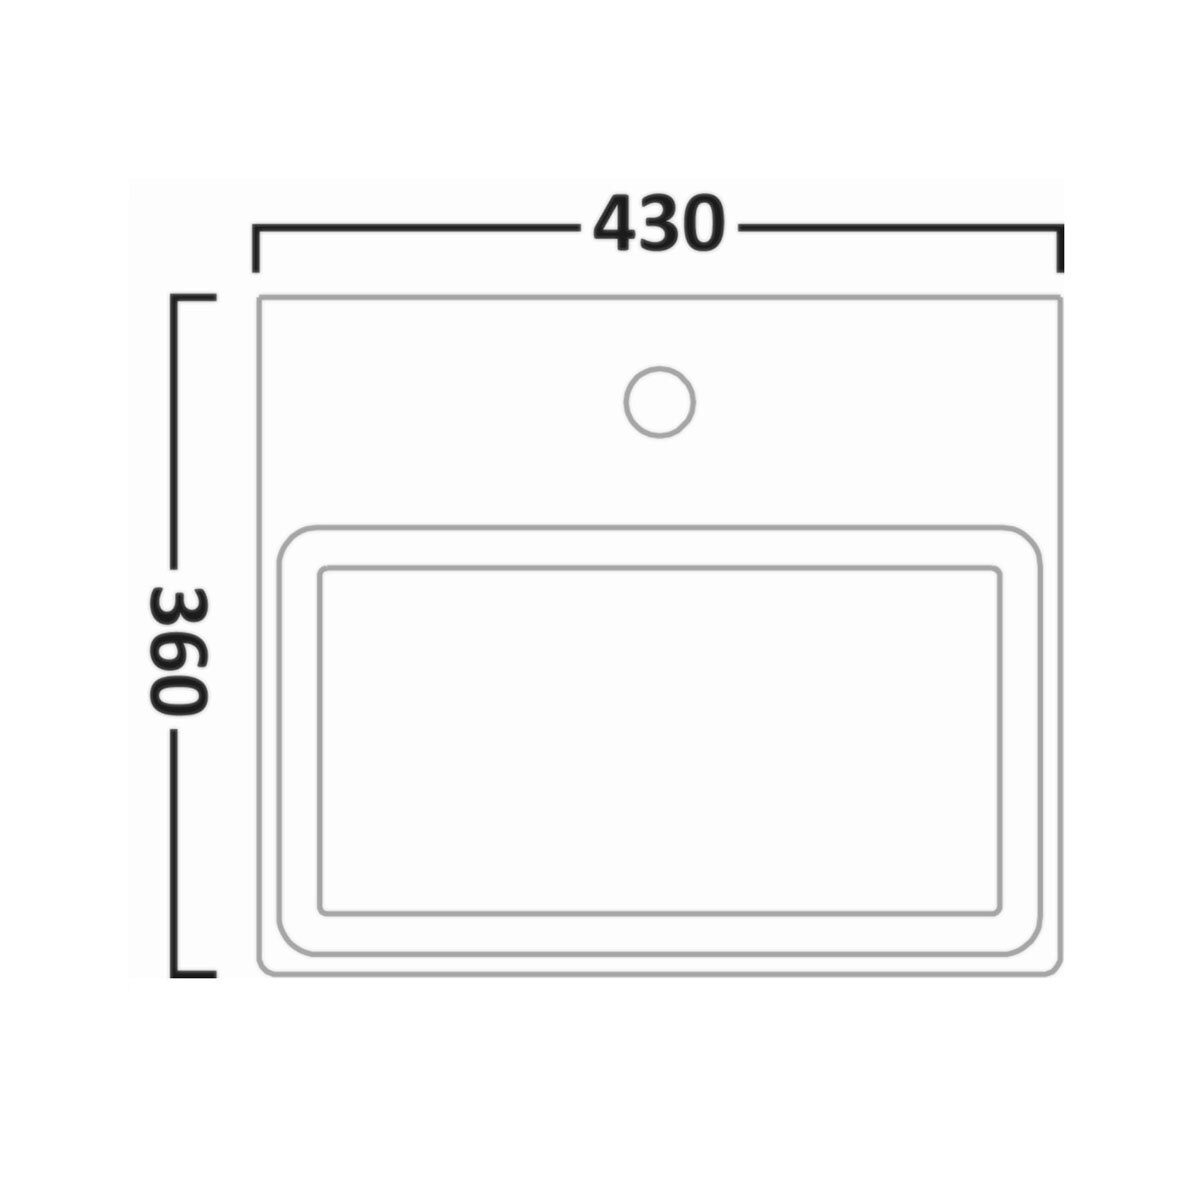 Line drawing of sink on white background with dimensions